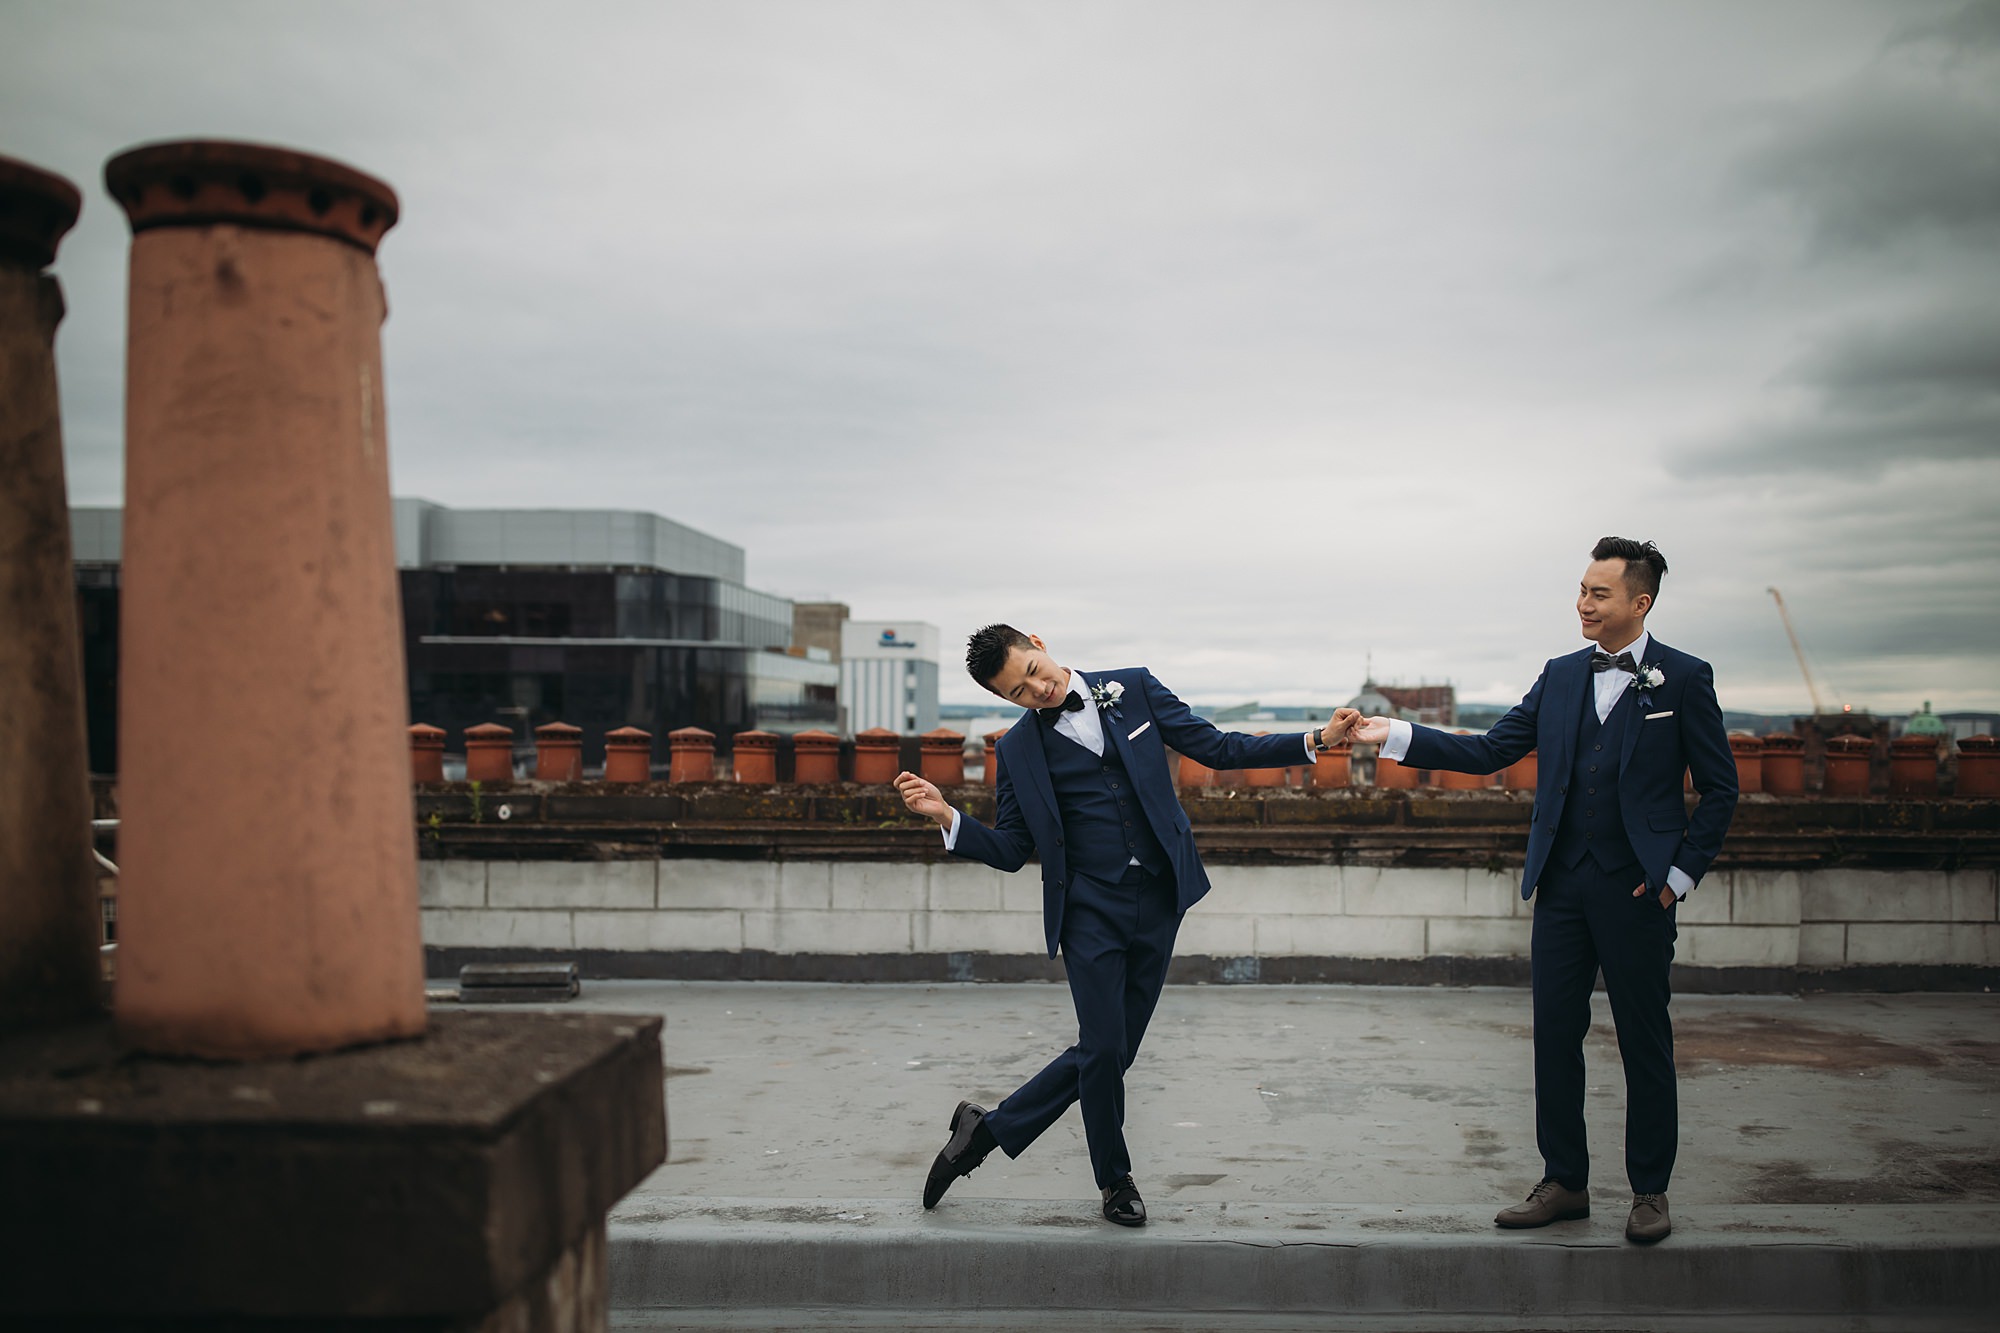 Two grooms dance together on a rooftop during their Glasgow elopement.